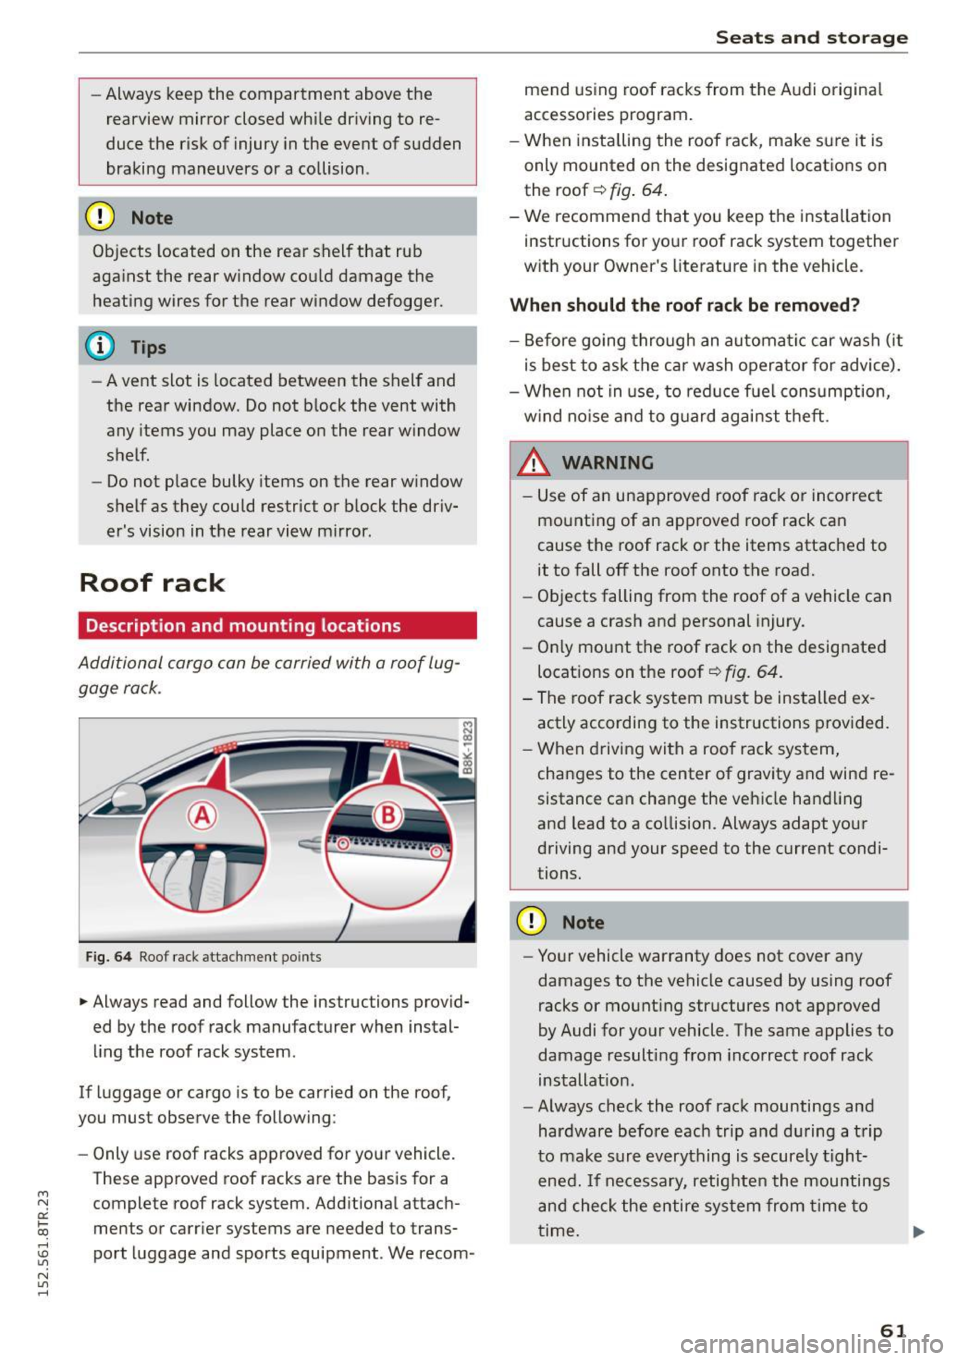 AUDI RS5 COUPE 2015  Owners Manual " N 
0:: l­oo 
rl I.O 
" N 
" rl 
-Always  keep the  compartment  above the 
rearview  mirror  closed while  driving  to  re­
duce the  risk  of  injury  in the  event  of  sudden 
braking  maneu